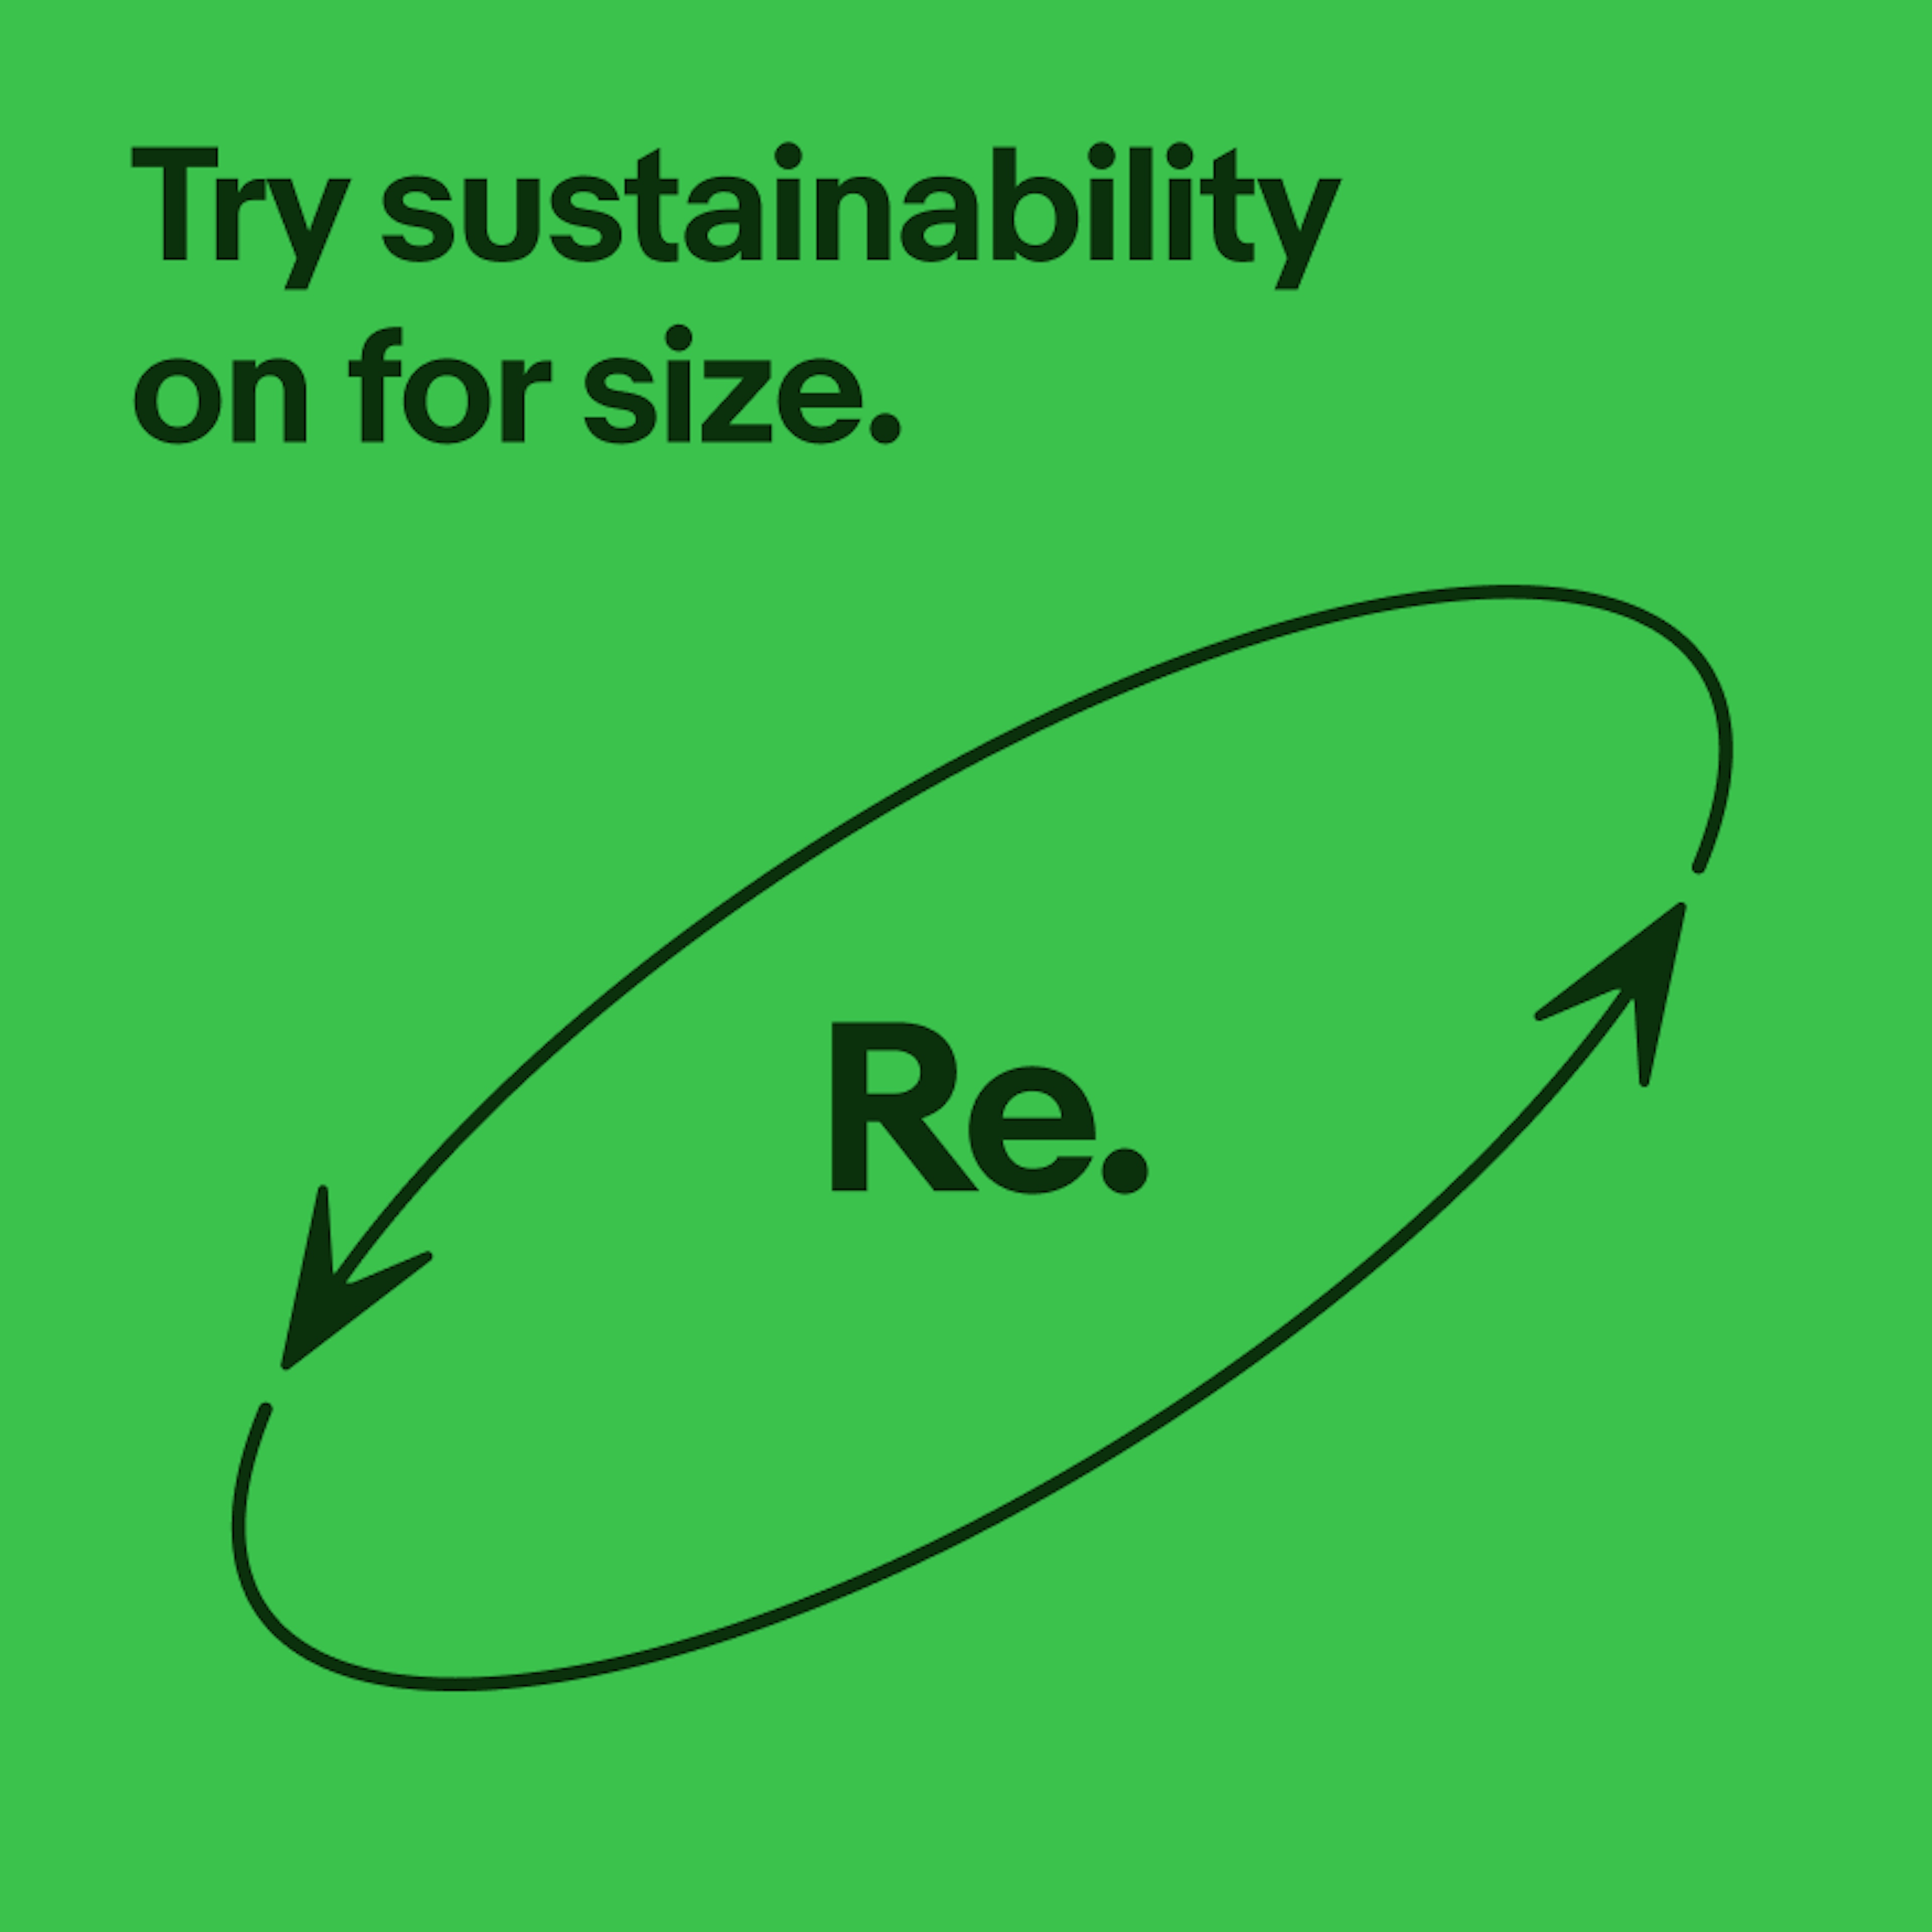 A sustainability graphic with text and arrows. The foreground color is dark green, while the background color is a lighter green.